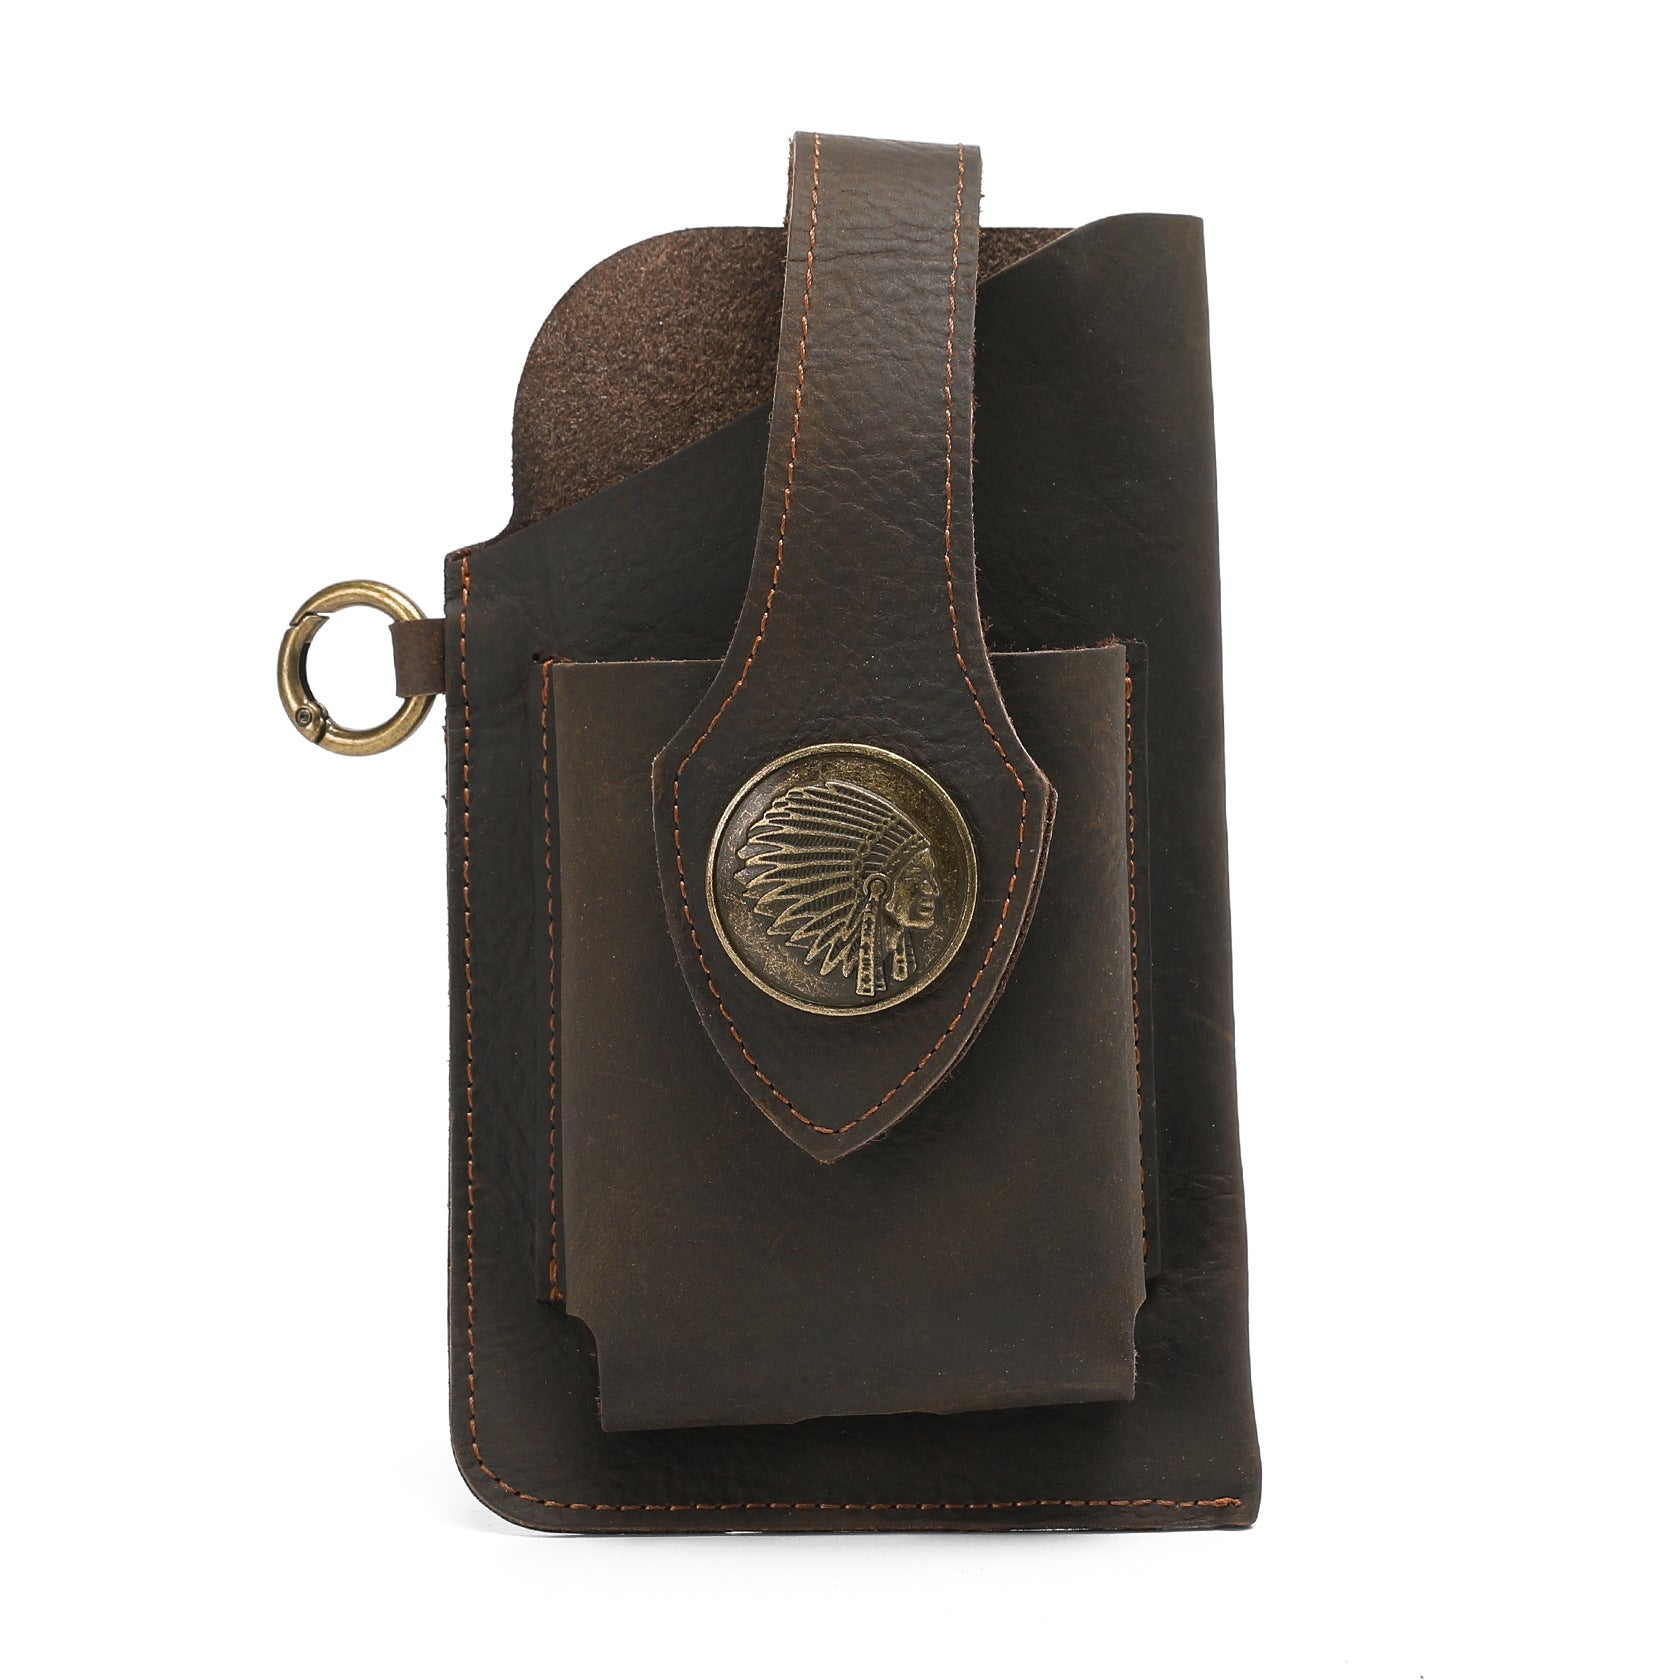 BeltBag - The Multifunctional Leather Phone Bag